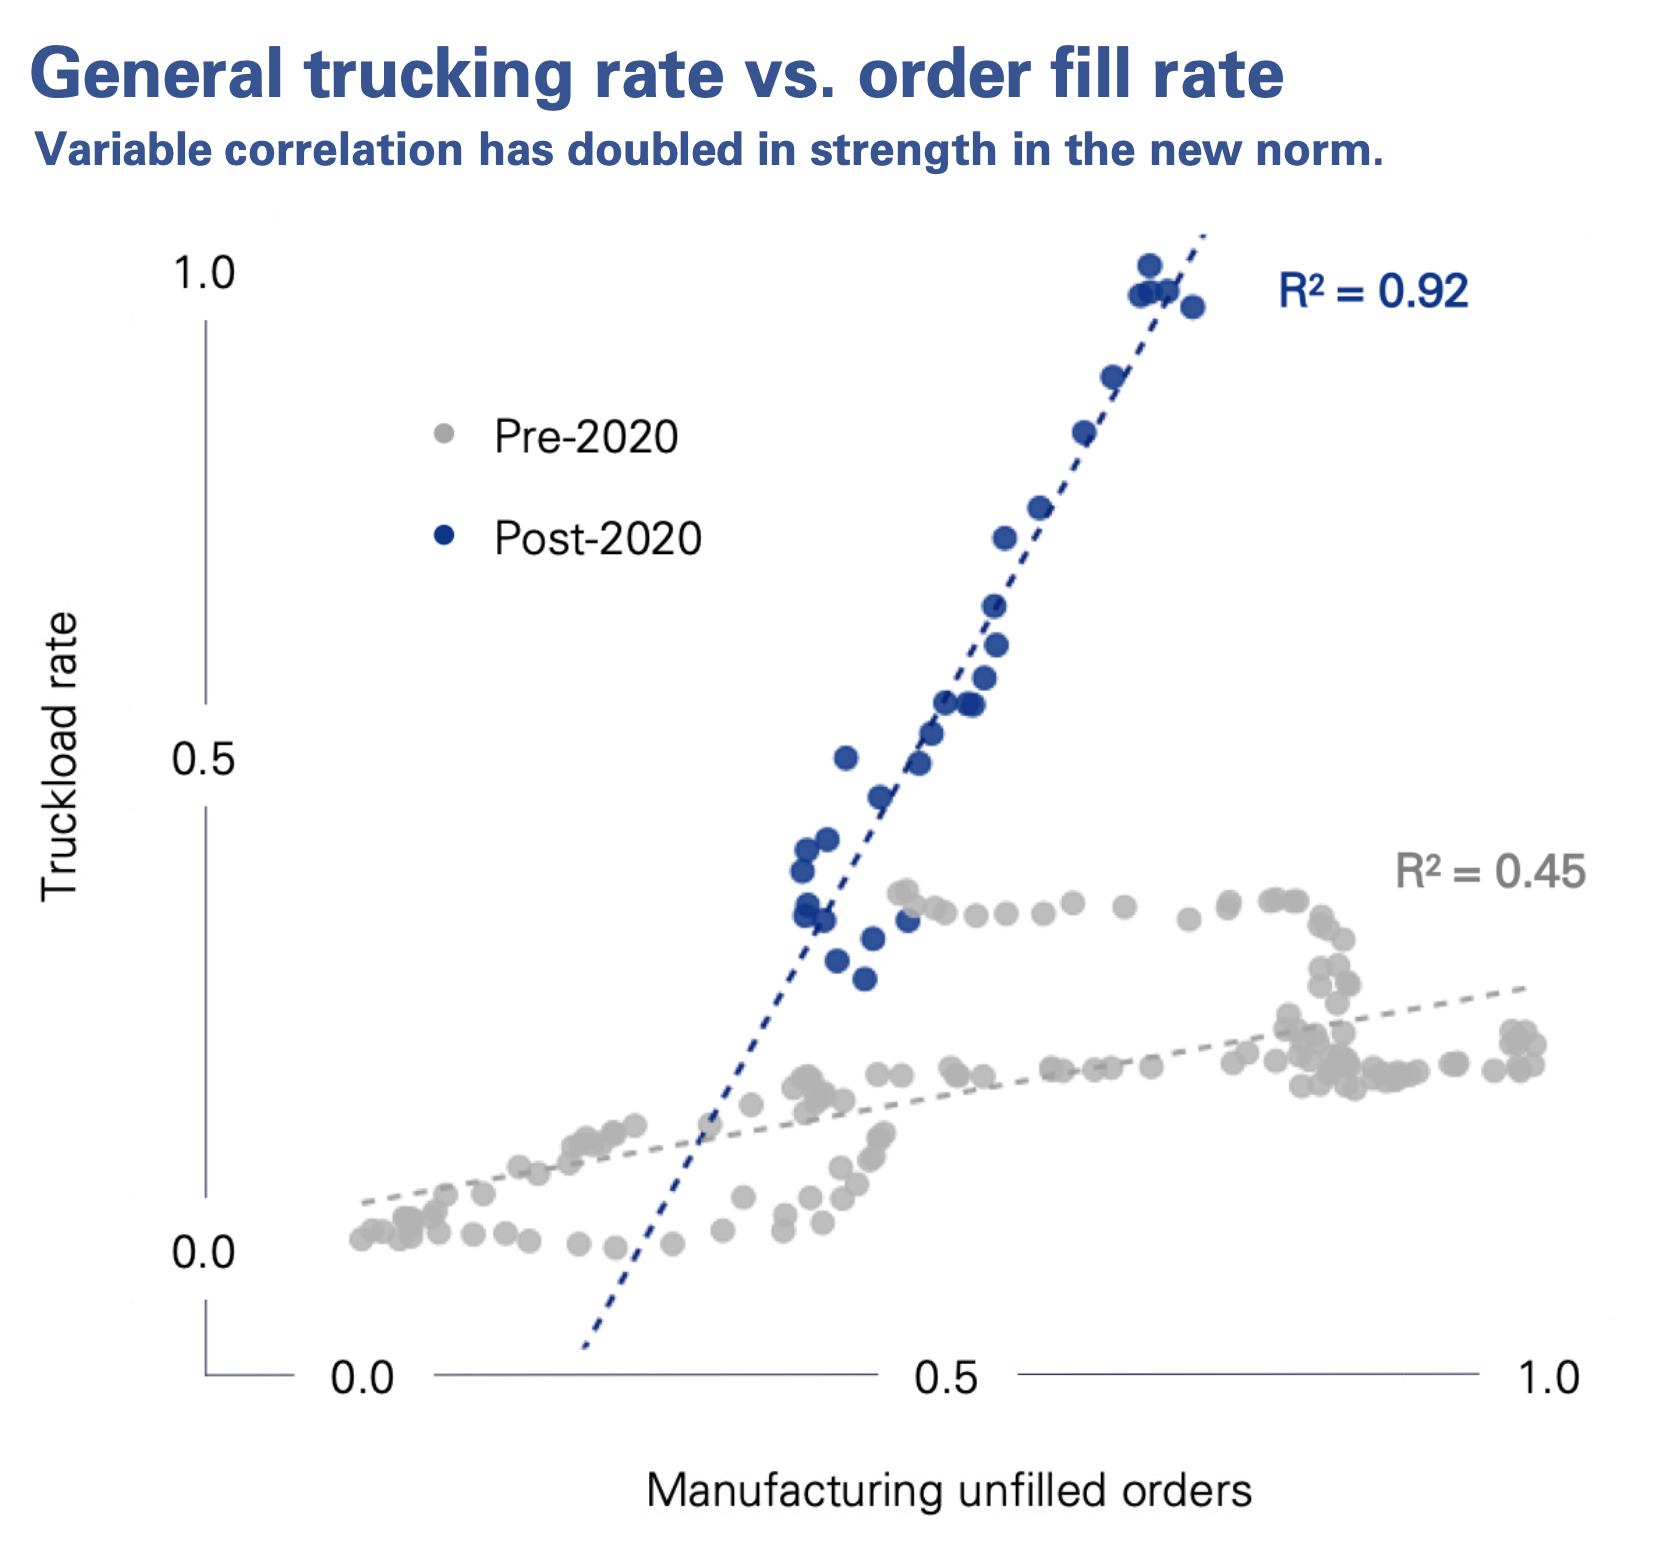 General trucking rate vs. order fill rate